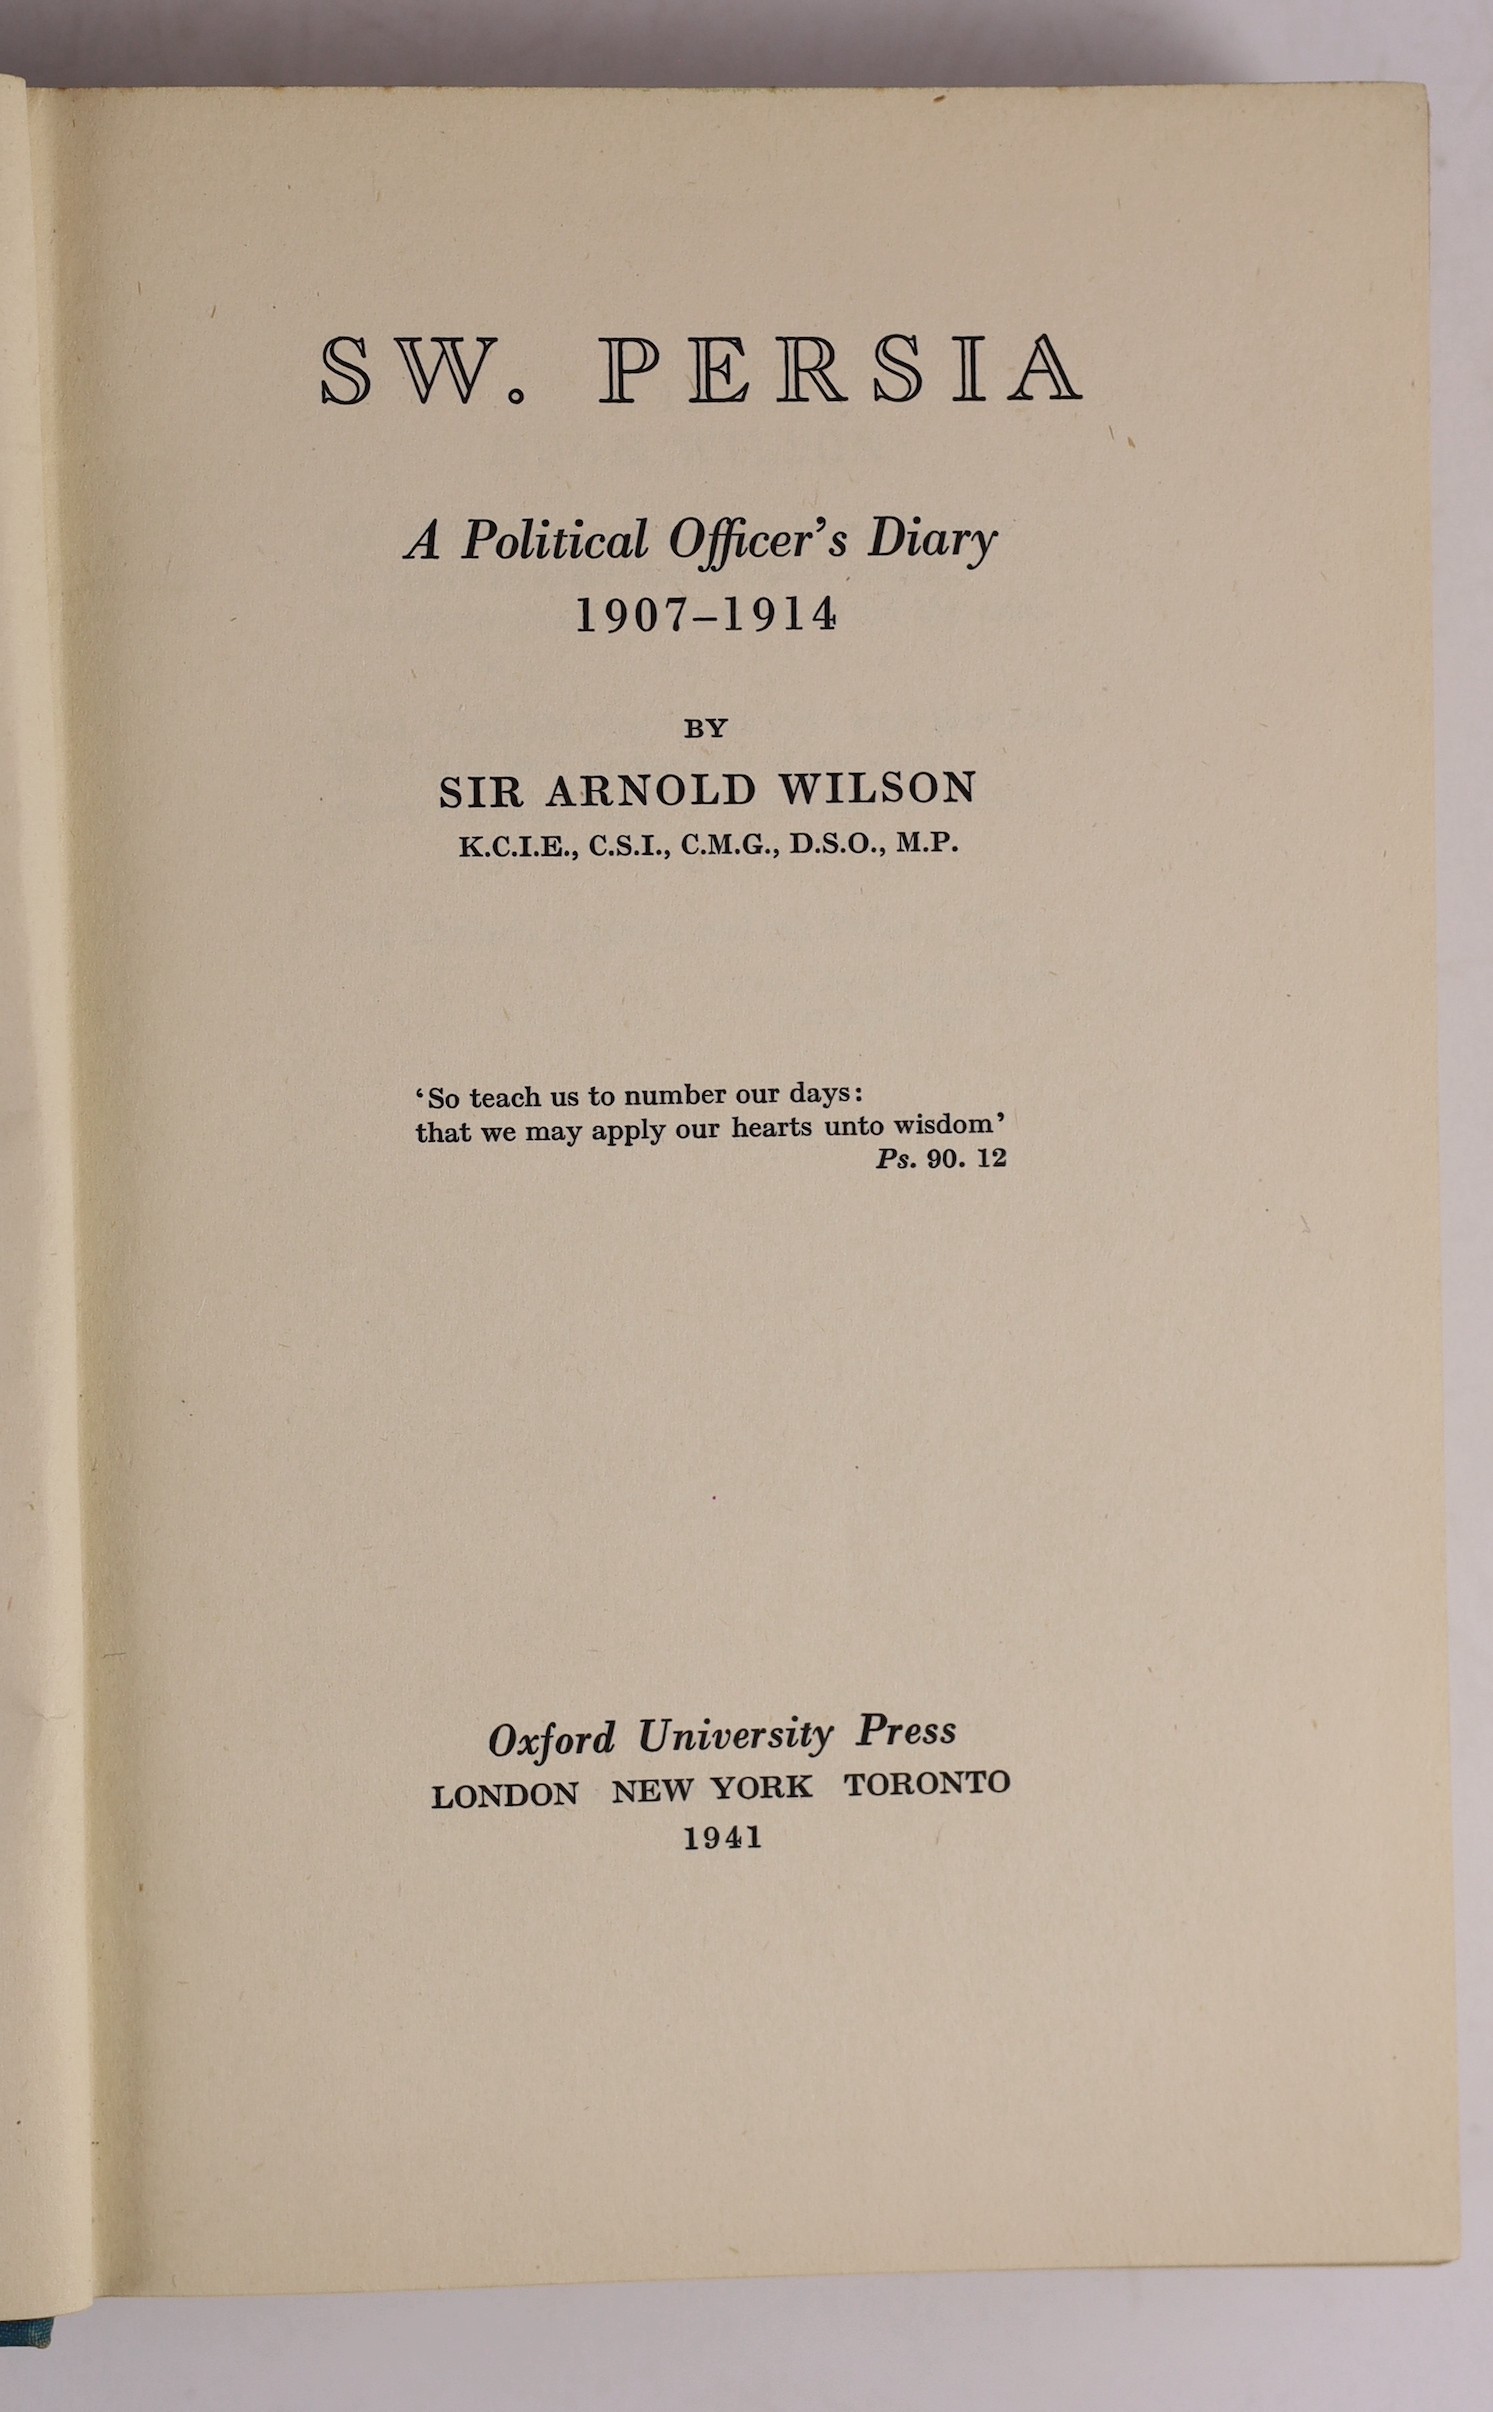 Lawrence, T.E - Seven Pillars of Wisdom. 4to, cloth, Jonathan Cape, London, 1935; Wilson, Arnold - S.W. Persia, A Political Officer’s Diary 1907-1914, 8vo, cloth, 1941 and Moberly, Frederick James (Brig,-Gen.) - Operatio